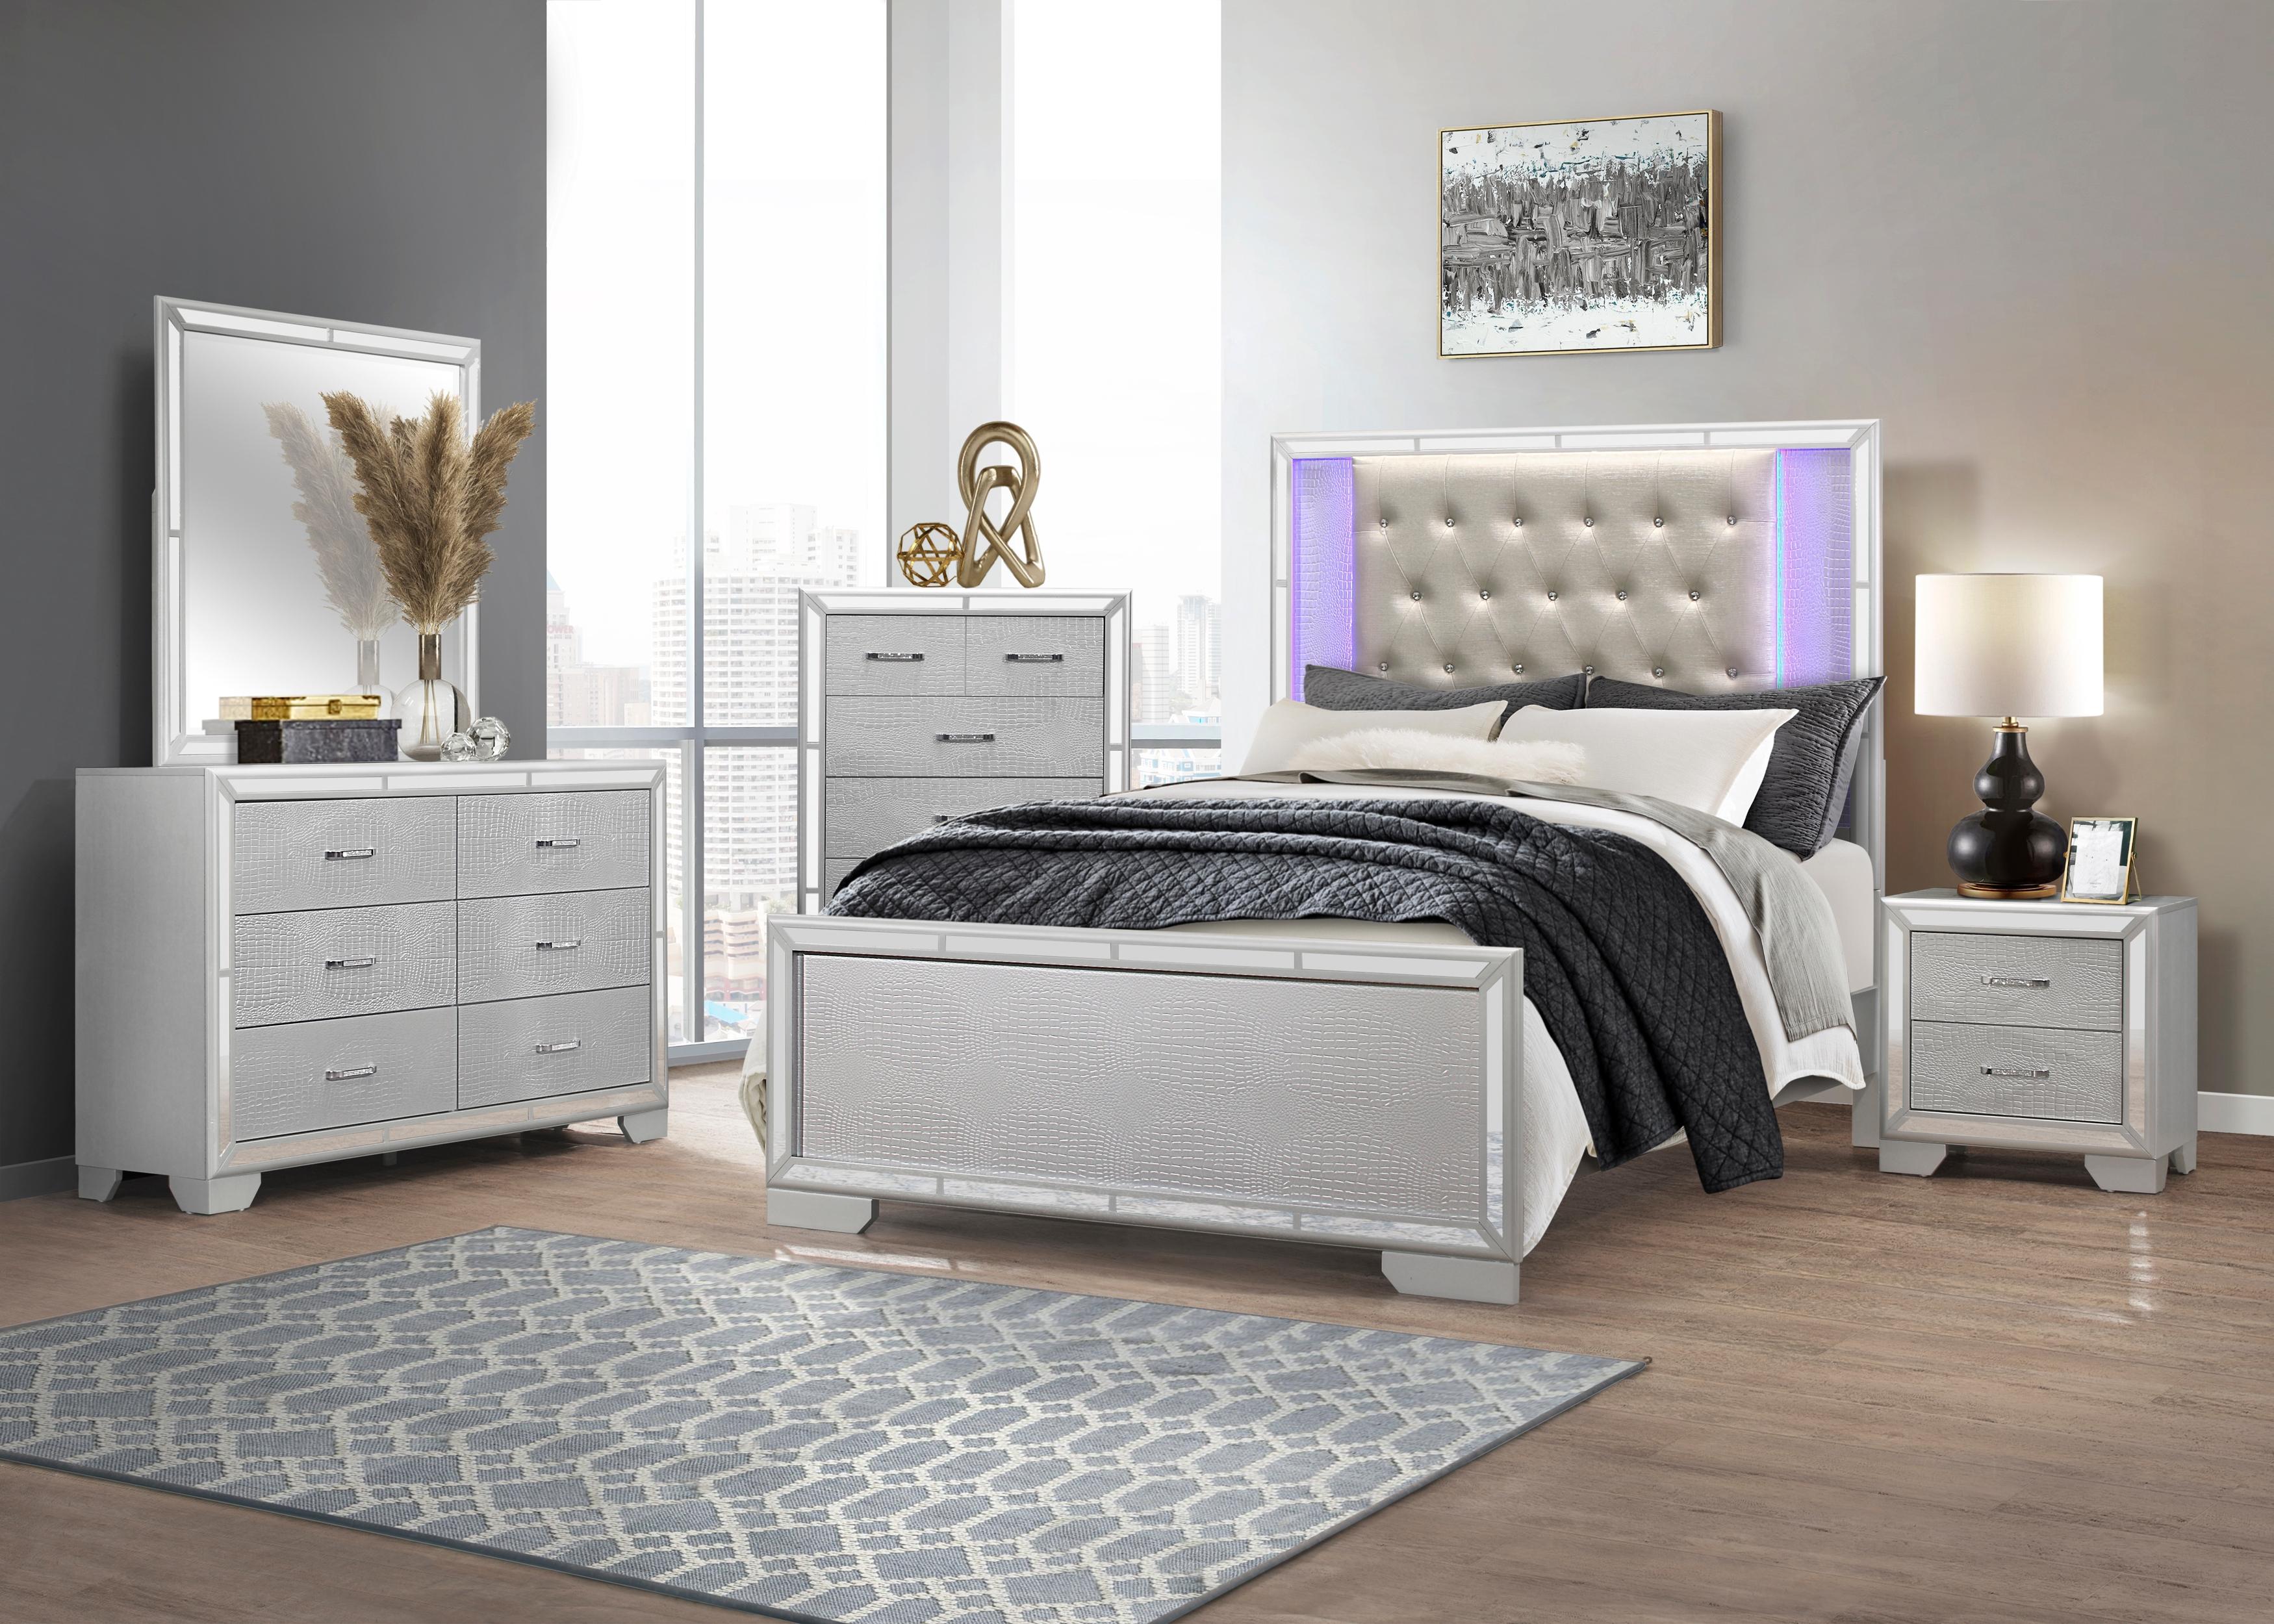 Modern Bedroom Set 1428SV-1-5PC Aveline 1428SV-1-5PC in Silver Faux Leather